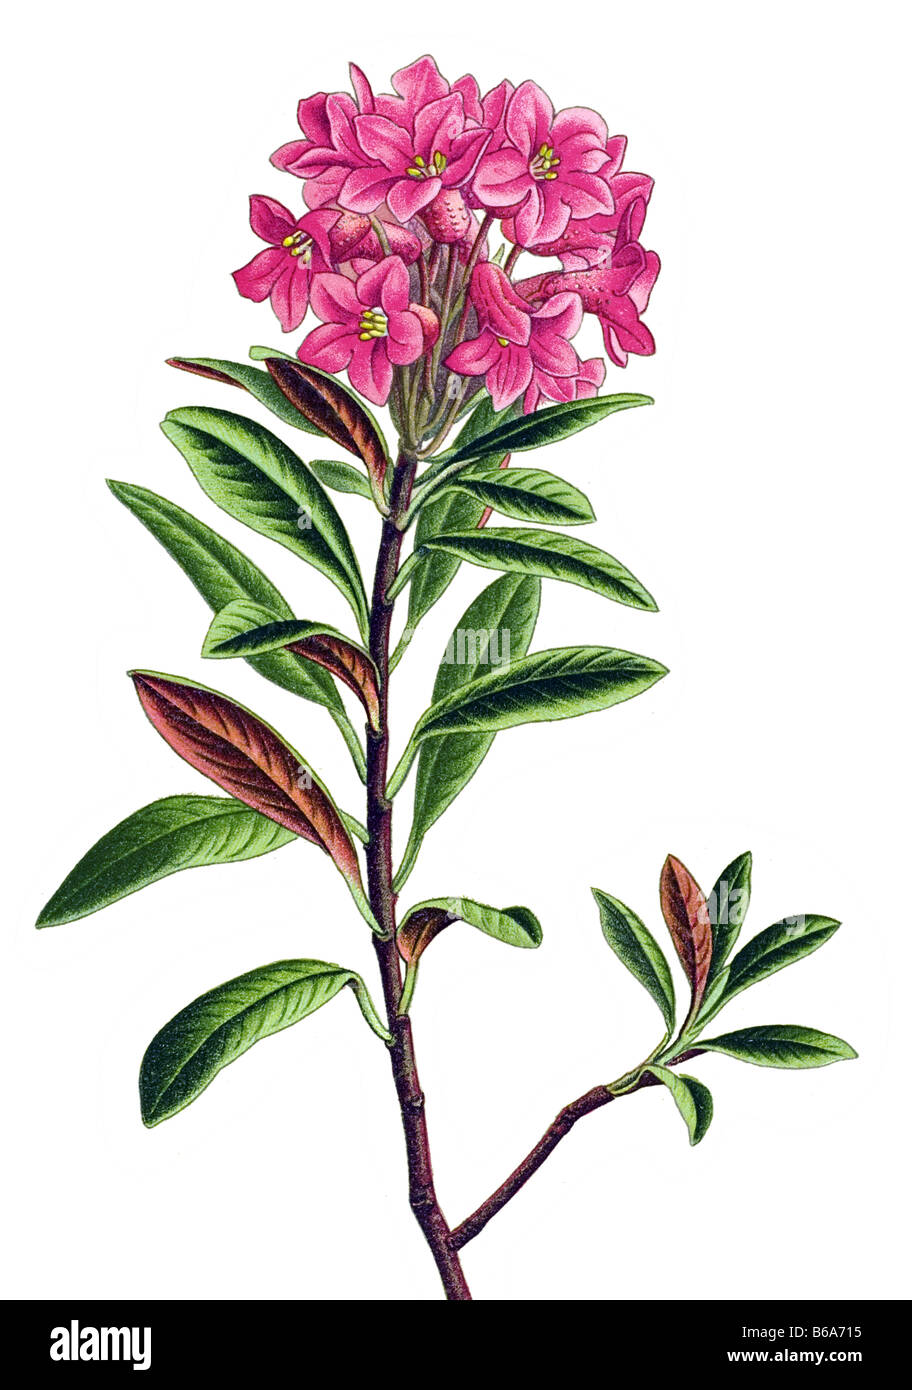 Rusty-leaved alpenrose, Rhododendron ferrugineum poisonous plants illustrations Stock Photo